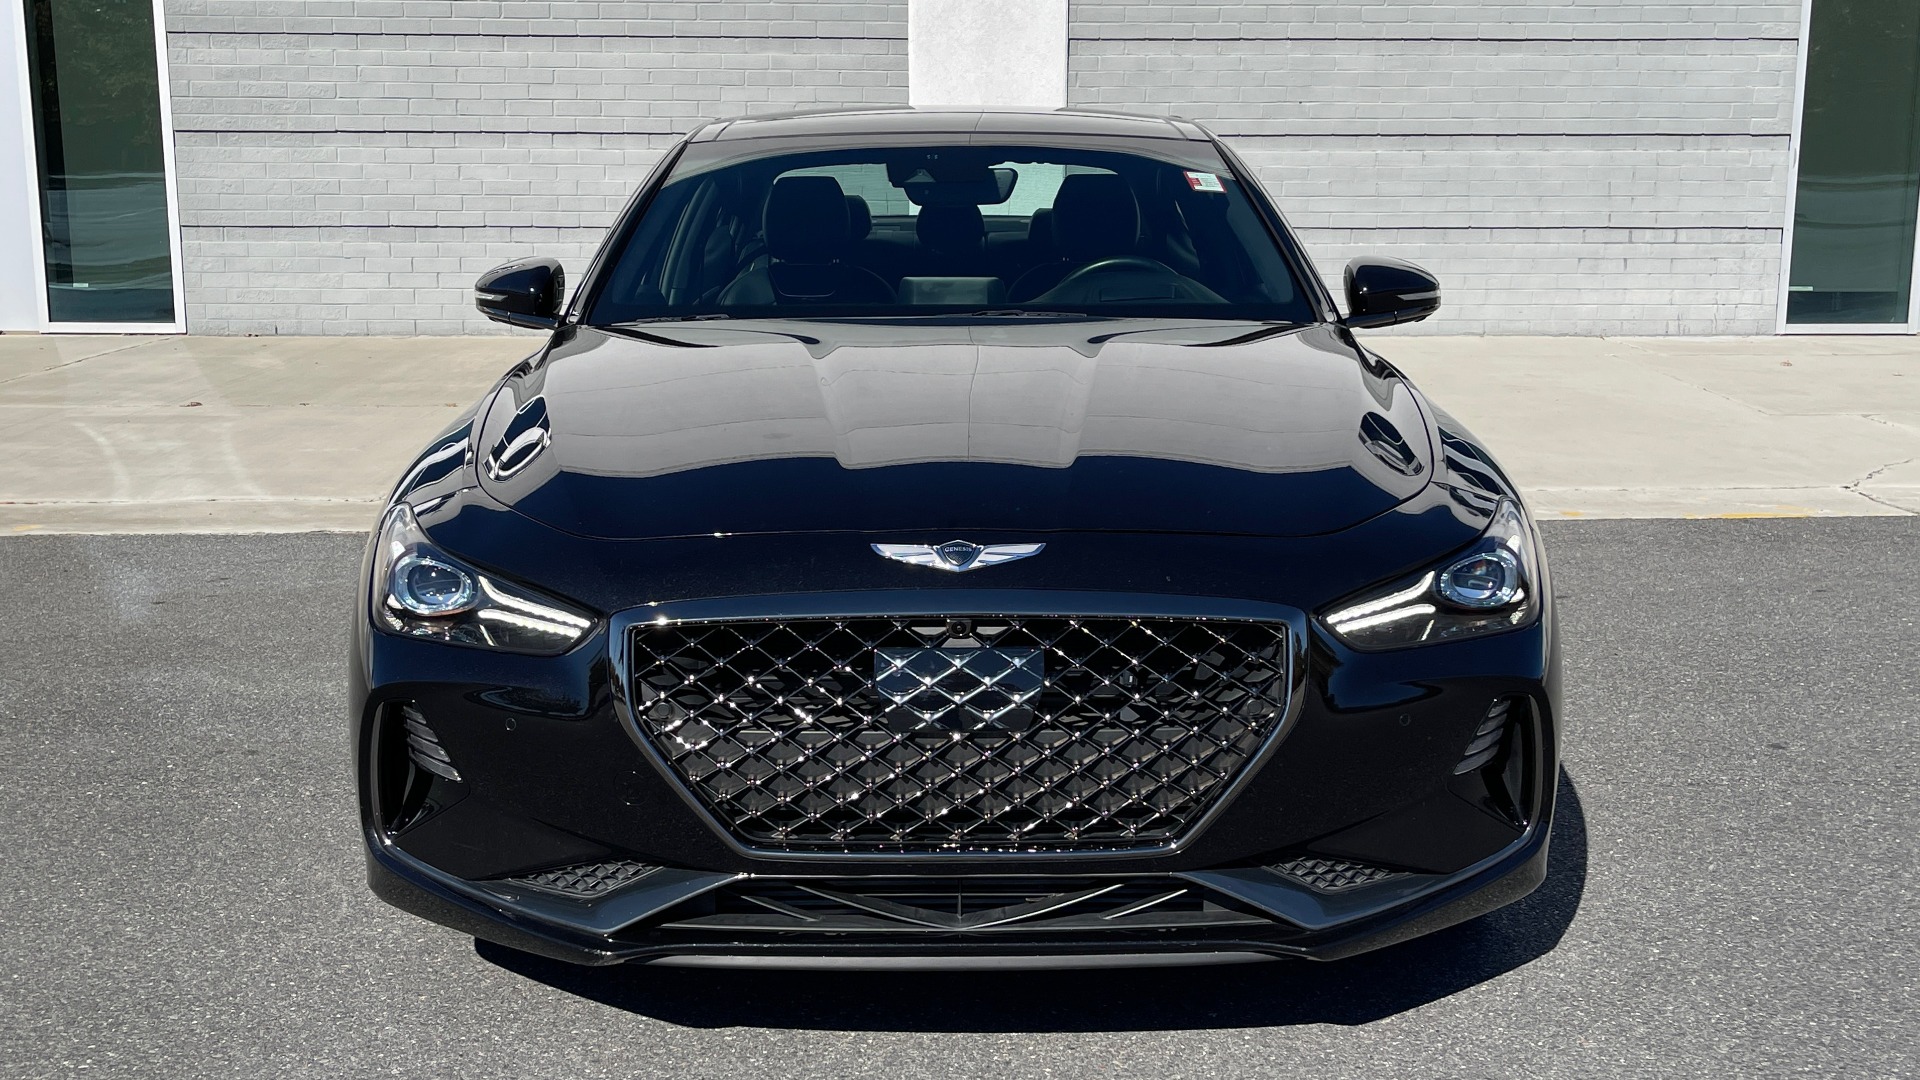 Used 2019 Genesis G70 3.3T ADVANCED RWD / NAV / HUD / PARK ASST / SUNROOF / SURROUND VIEW for sale Sold at Formula Imports in Charlotte NC 28227 10